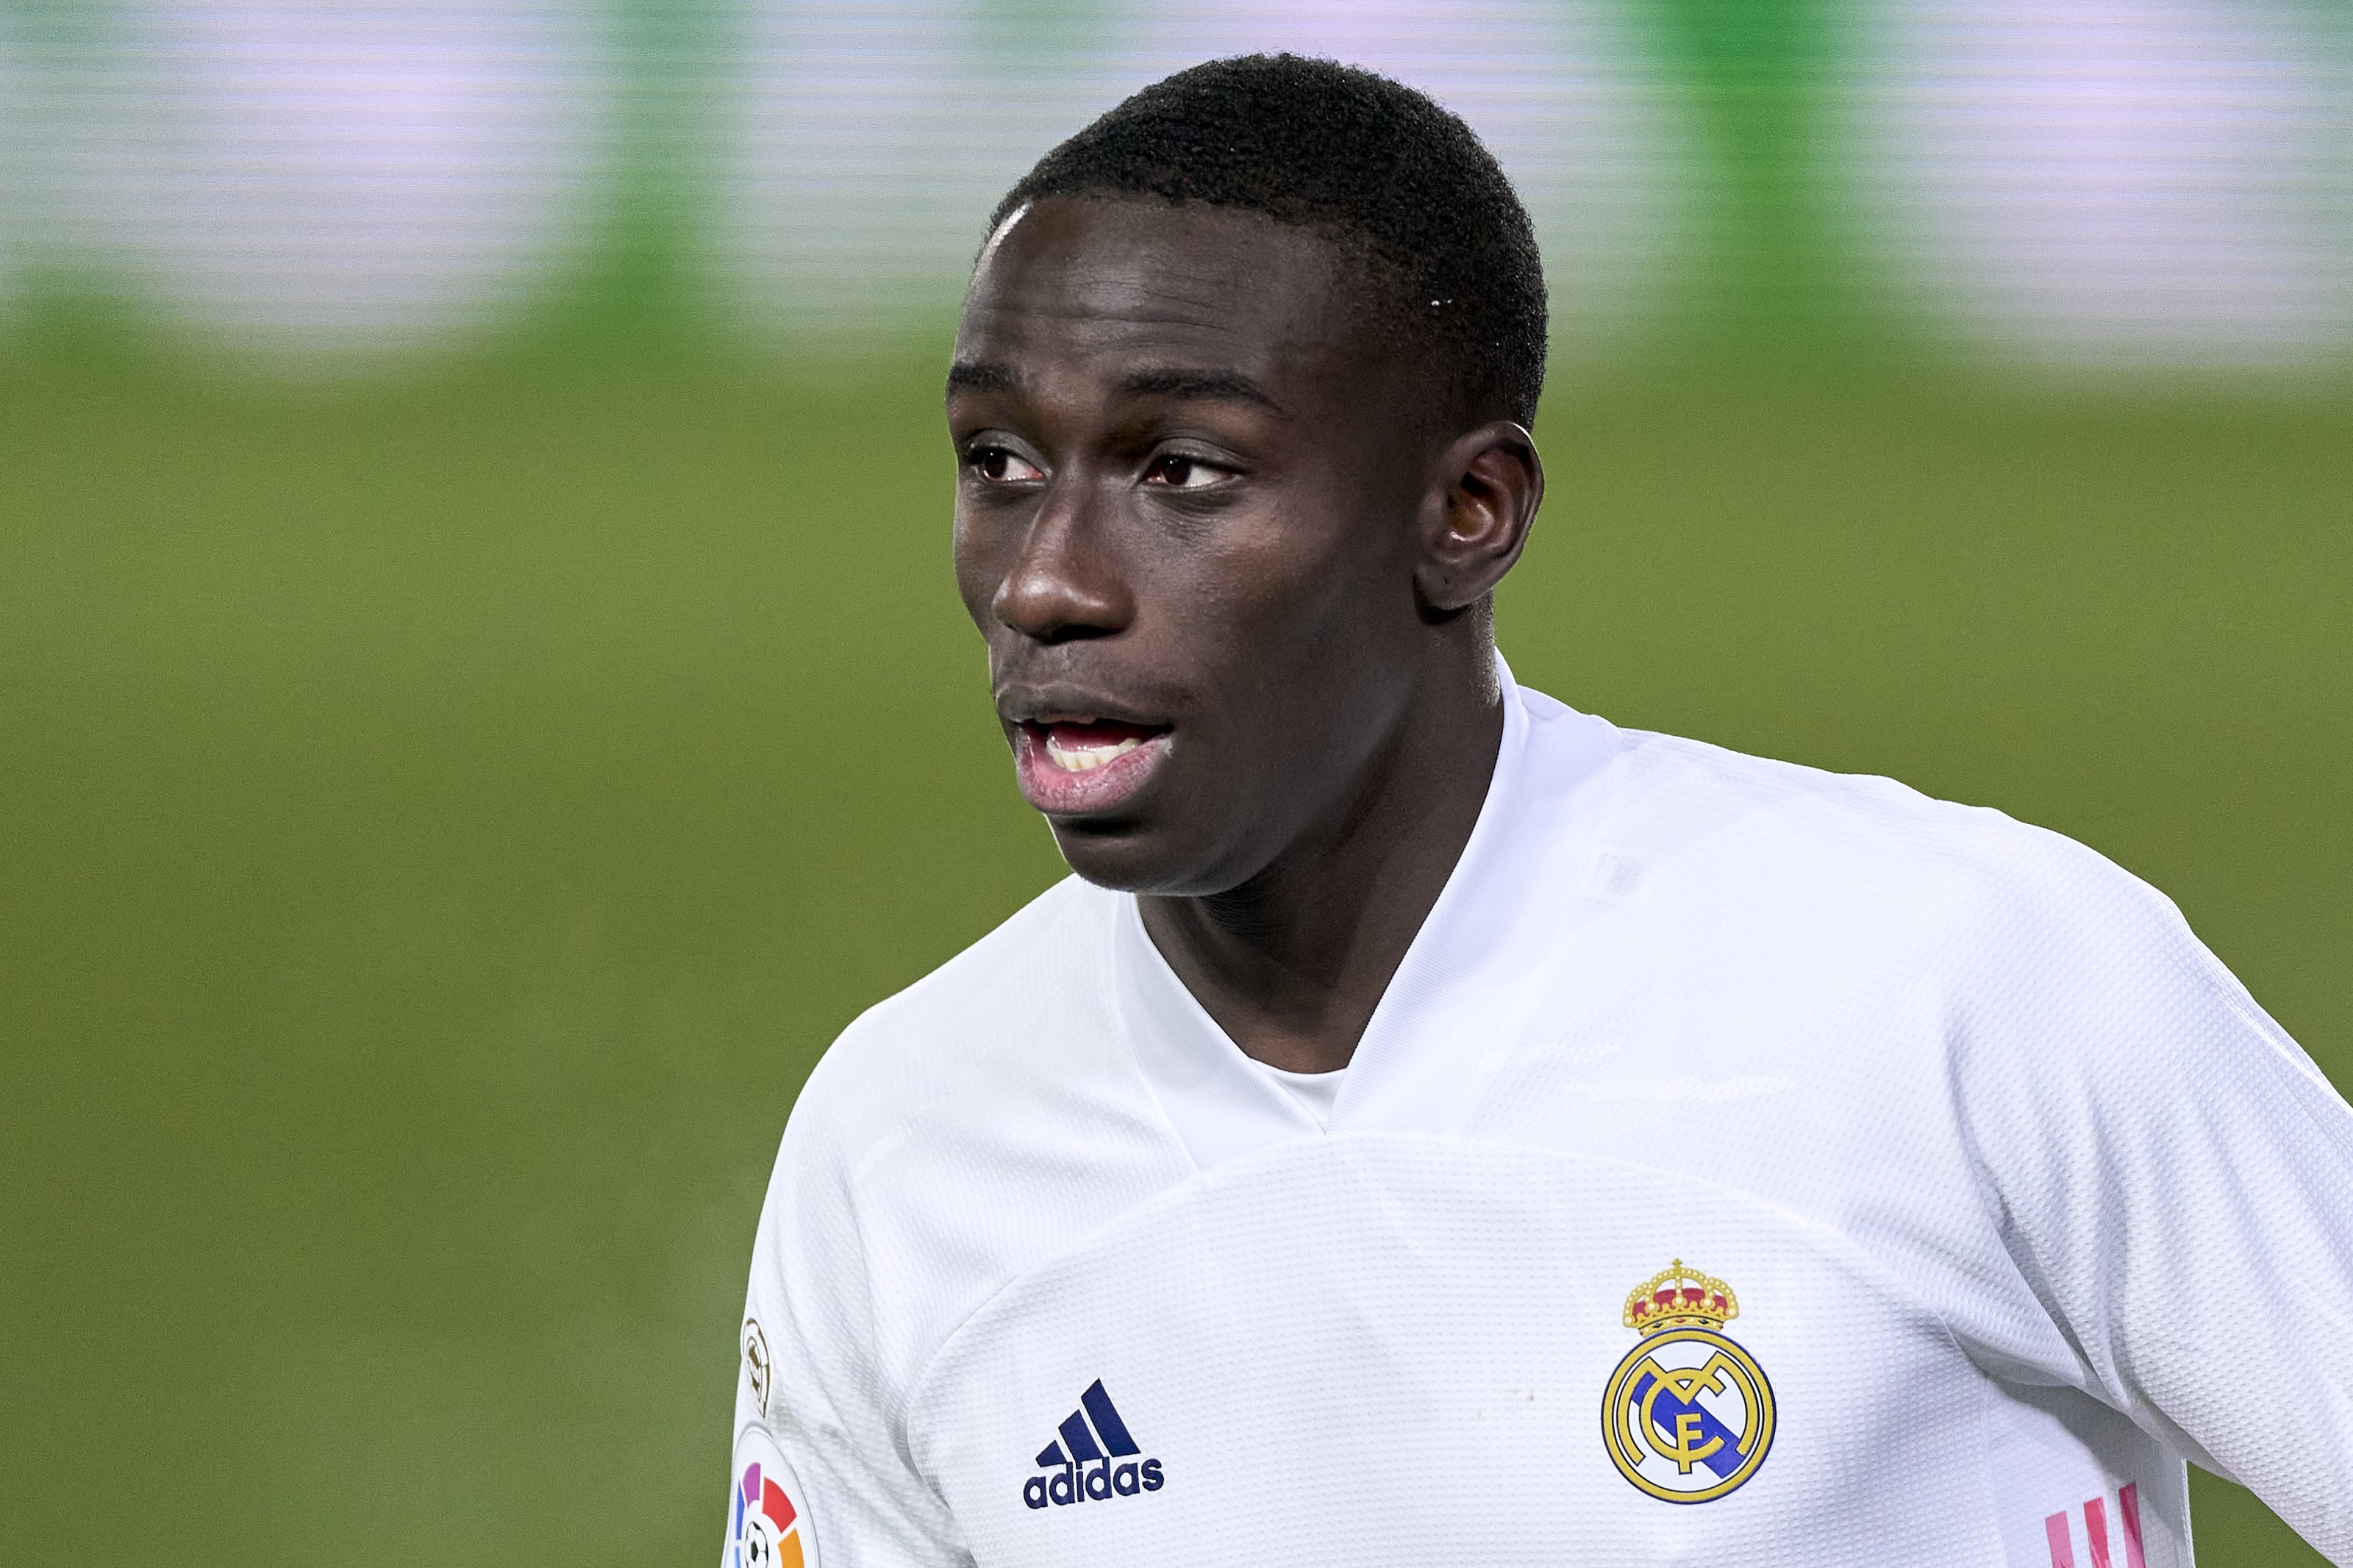  A photo of Ferland Mendy playing soccer for Real Madrid.